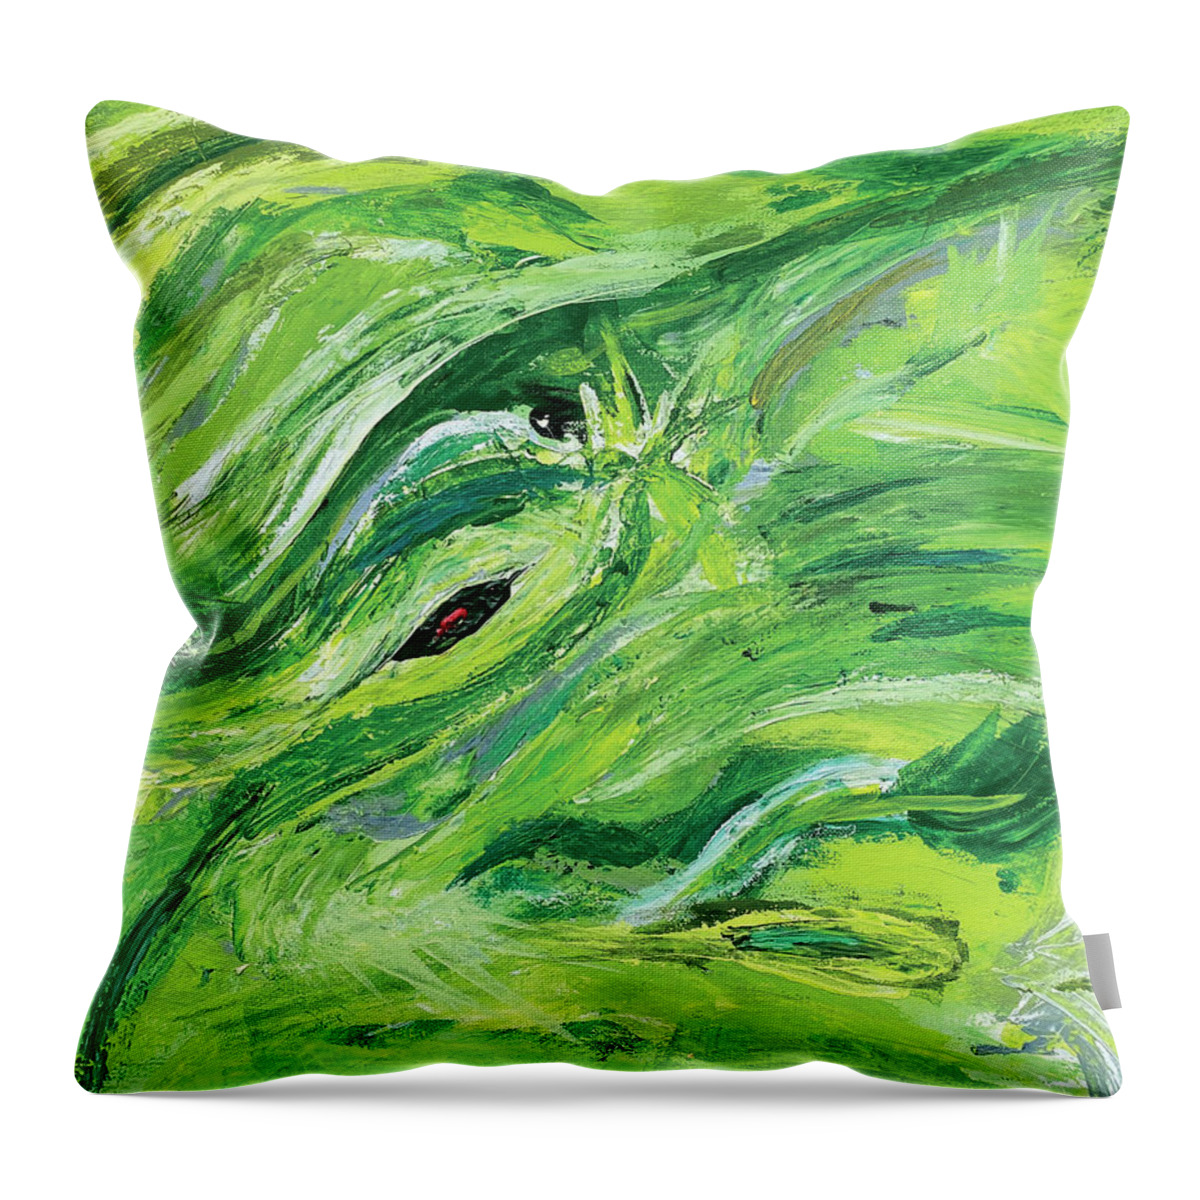 Pallet Knife Throw Pillow featuring the painting Offering by David Feder